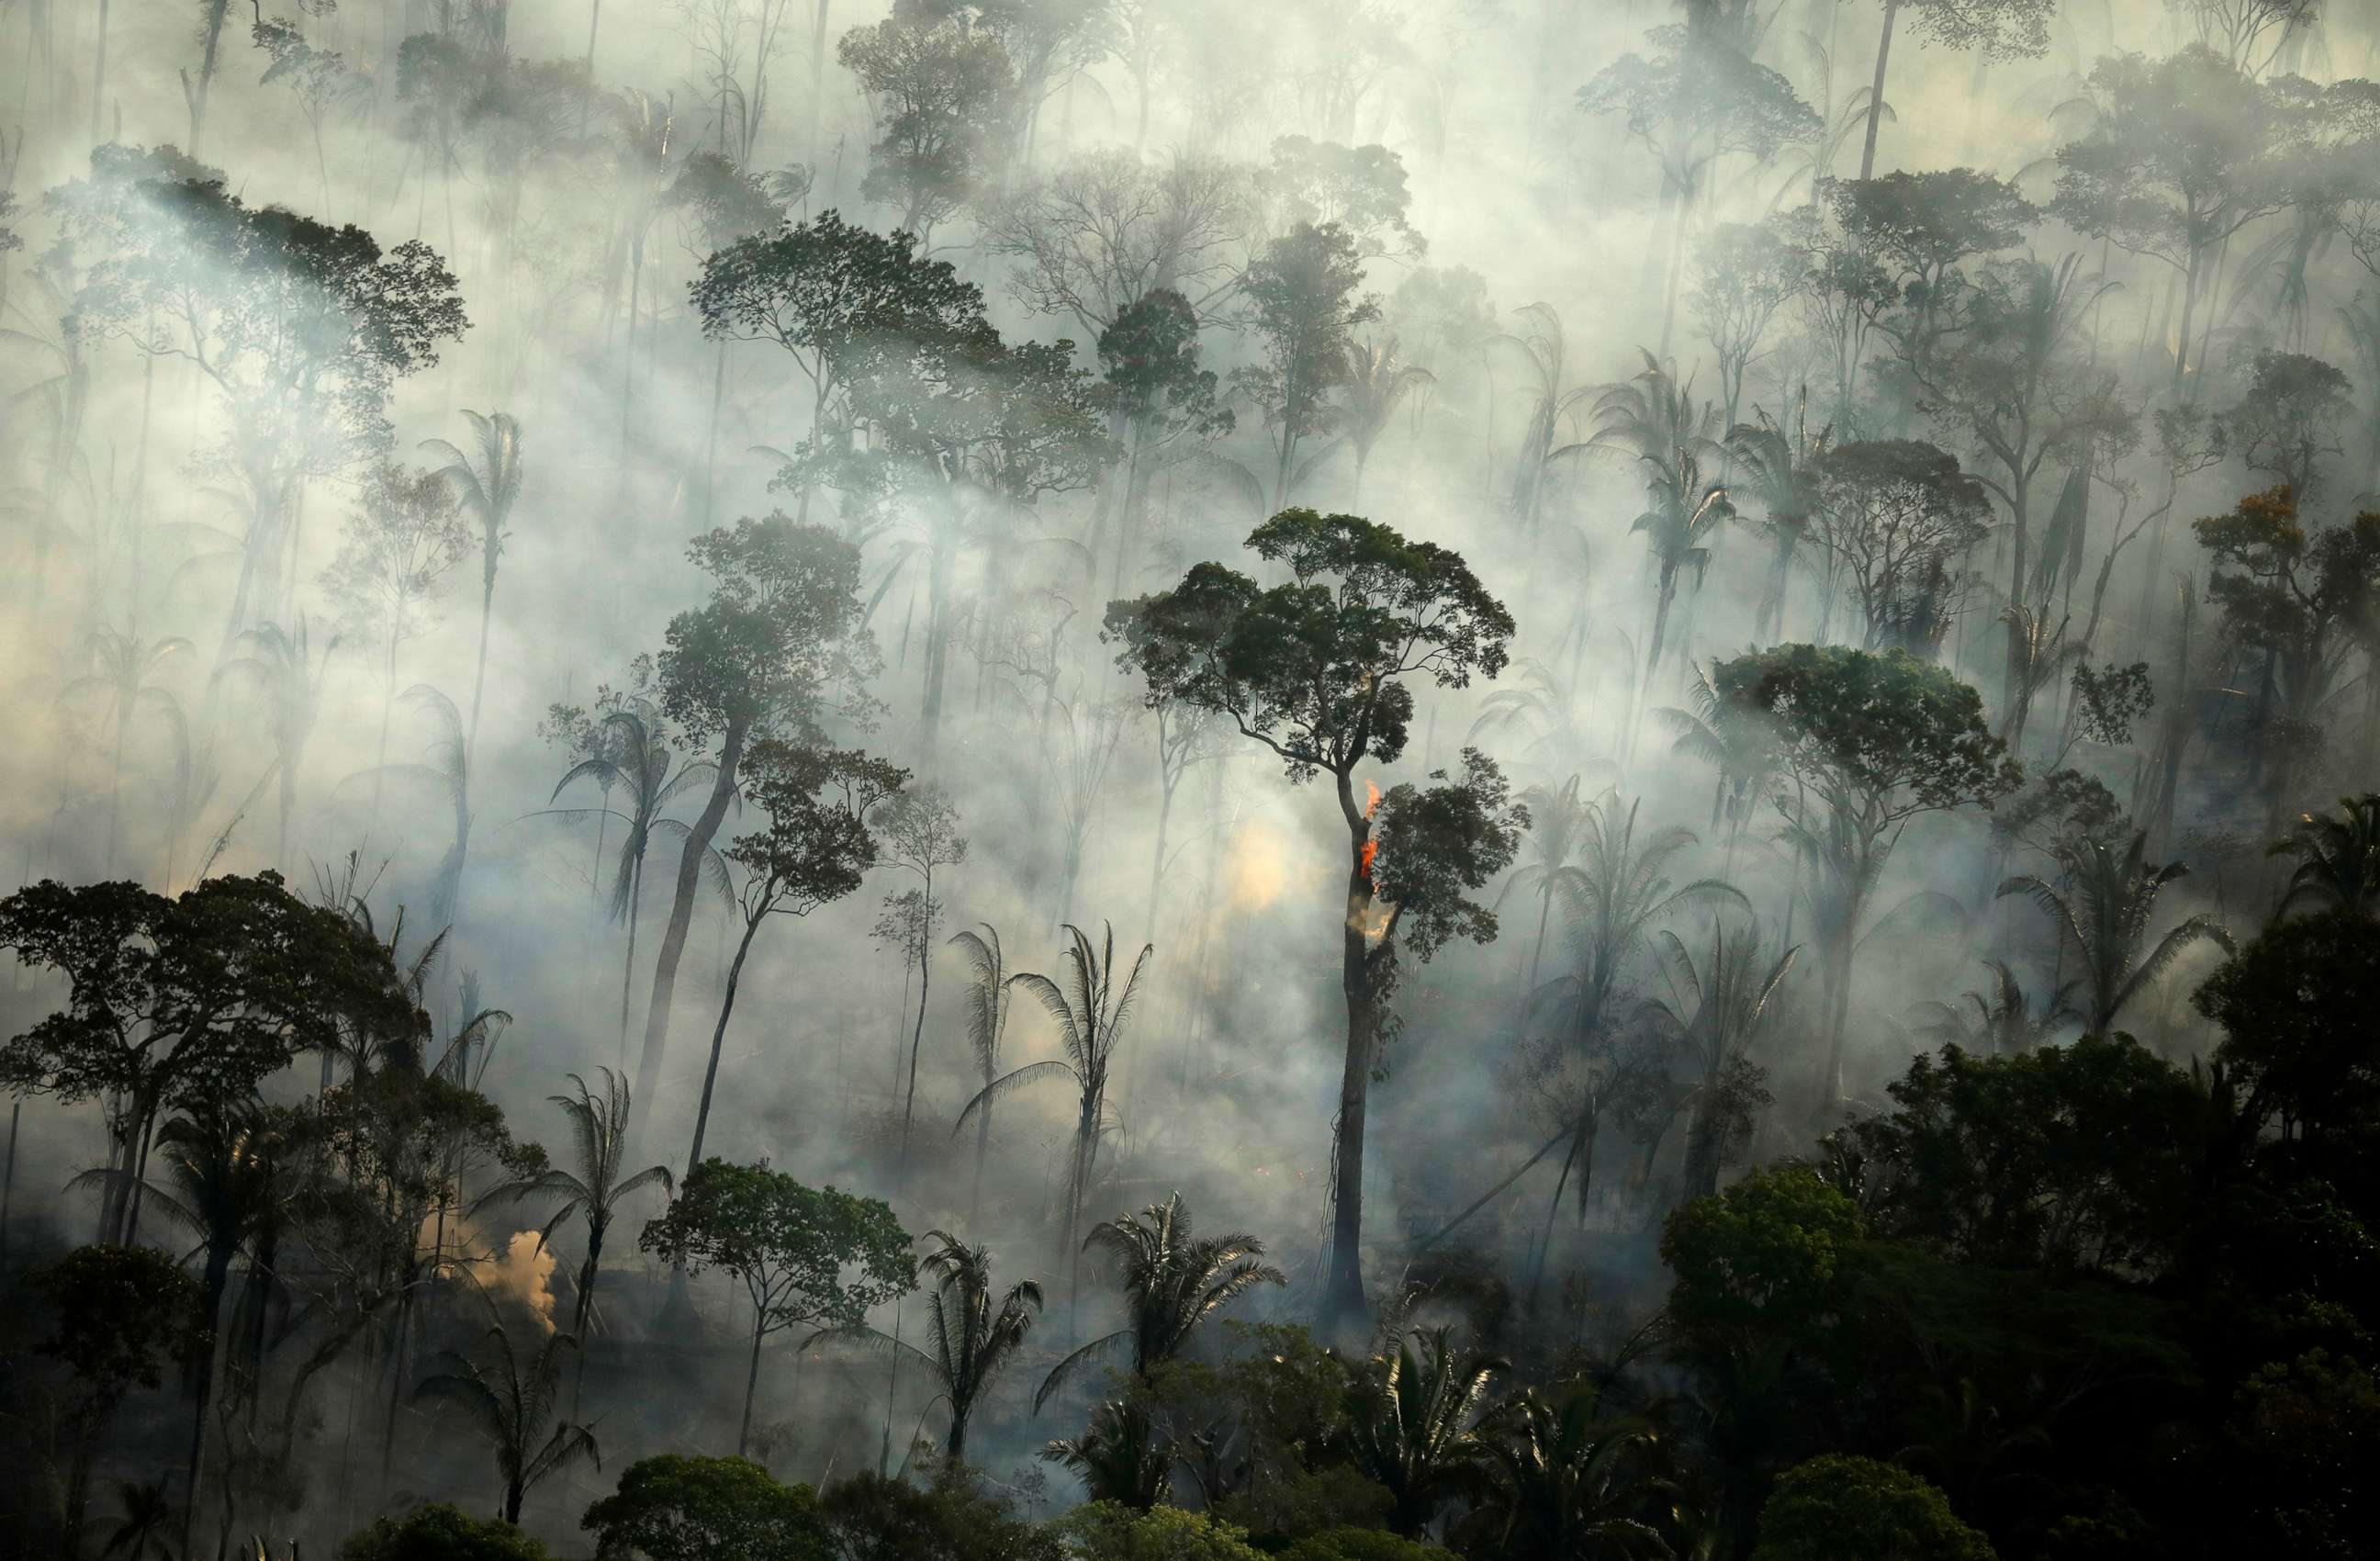 PHOTO: In this Sept. 10, 2019, file photo, smoke billows during a fire in an area of the Amazon rainforest near Porto Velho, Rondonia State, Brazil.